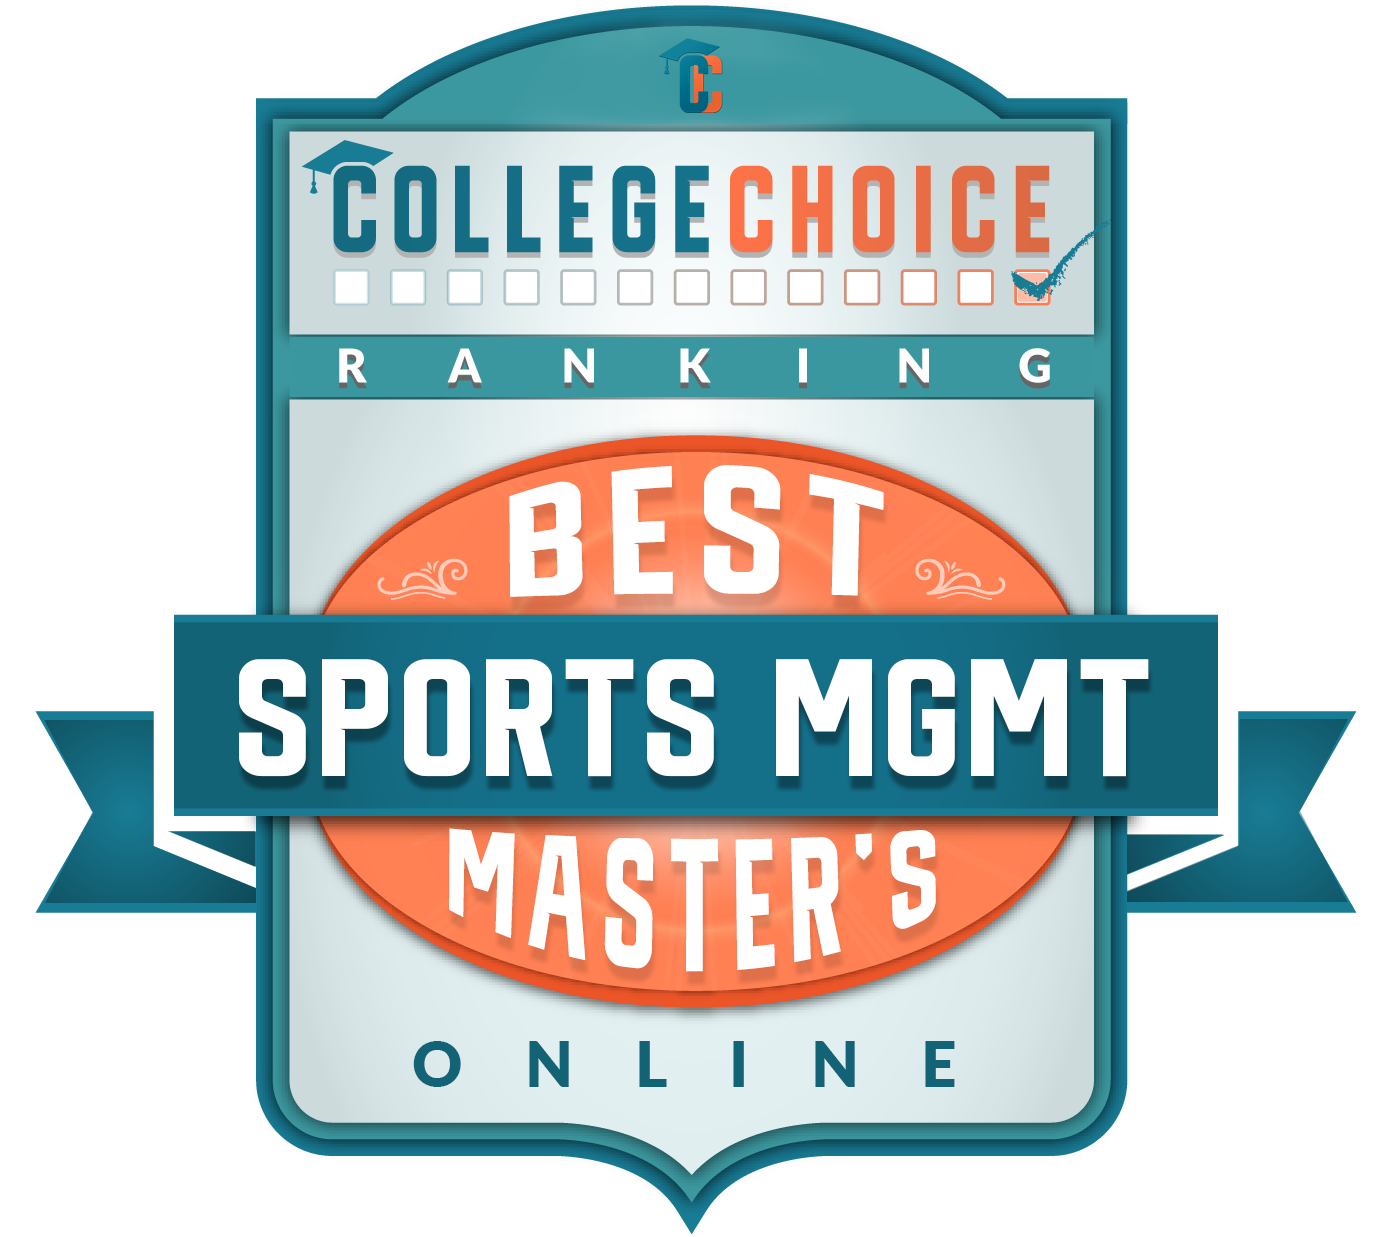 38 Top Pictures Masters Degree In Sports Management : Official Master's Degree in Sport Management Online ...